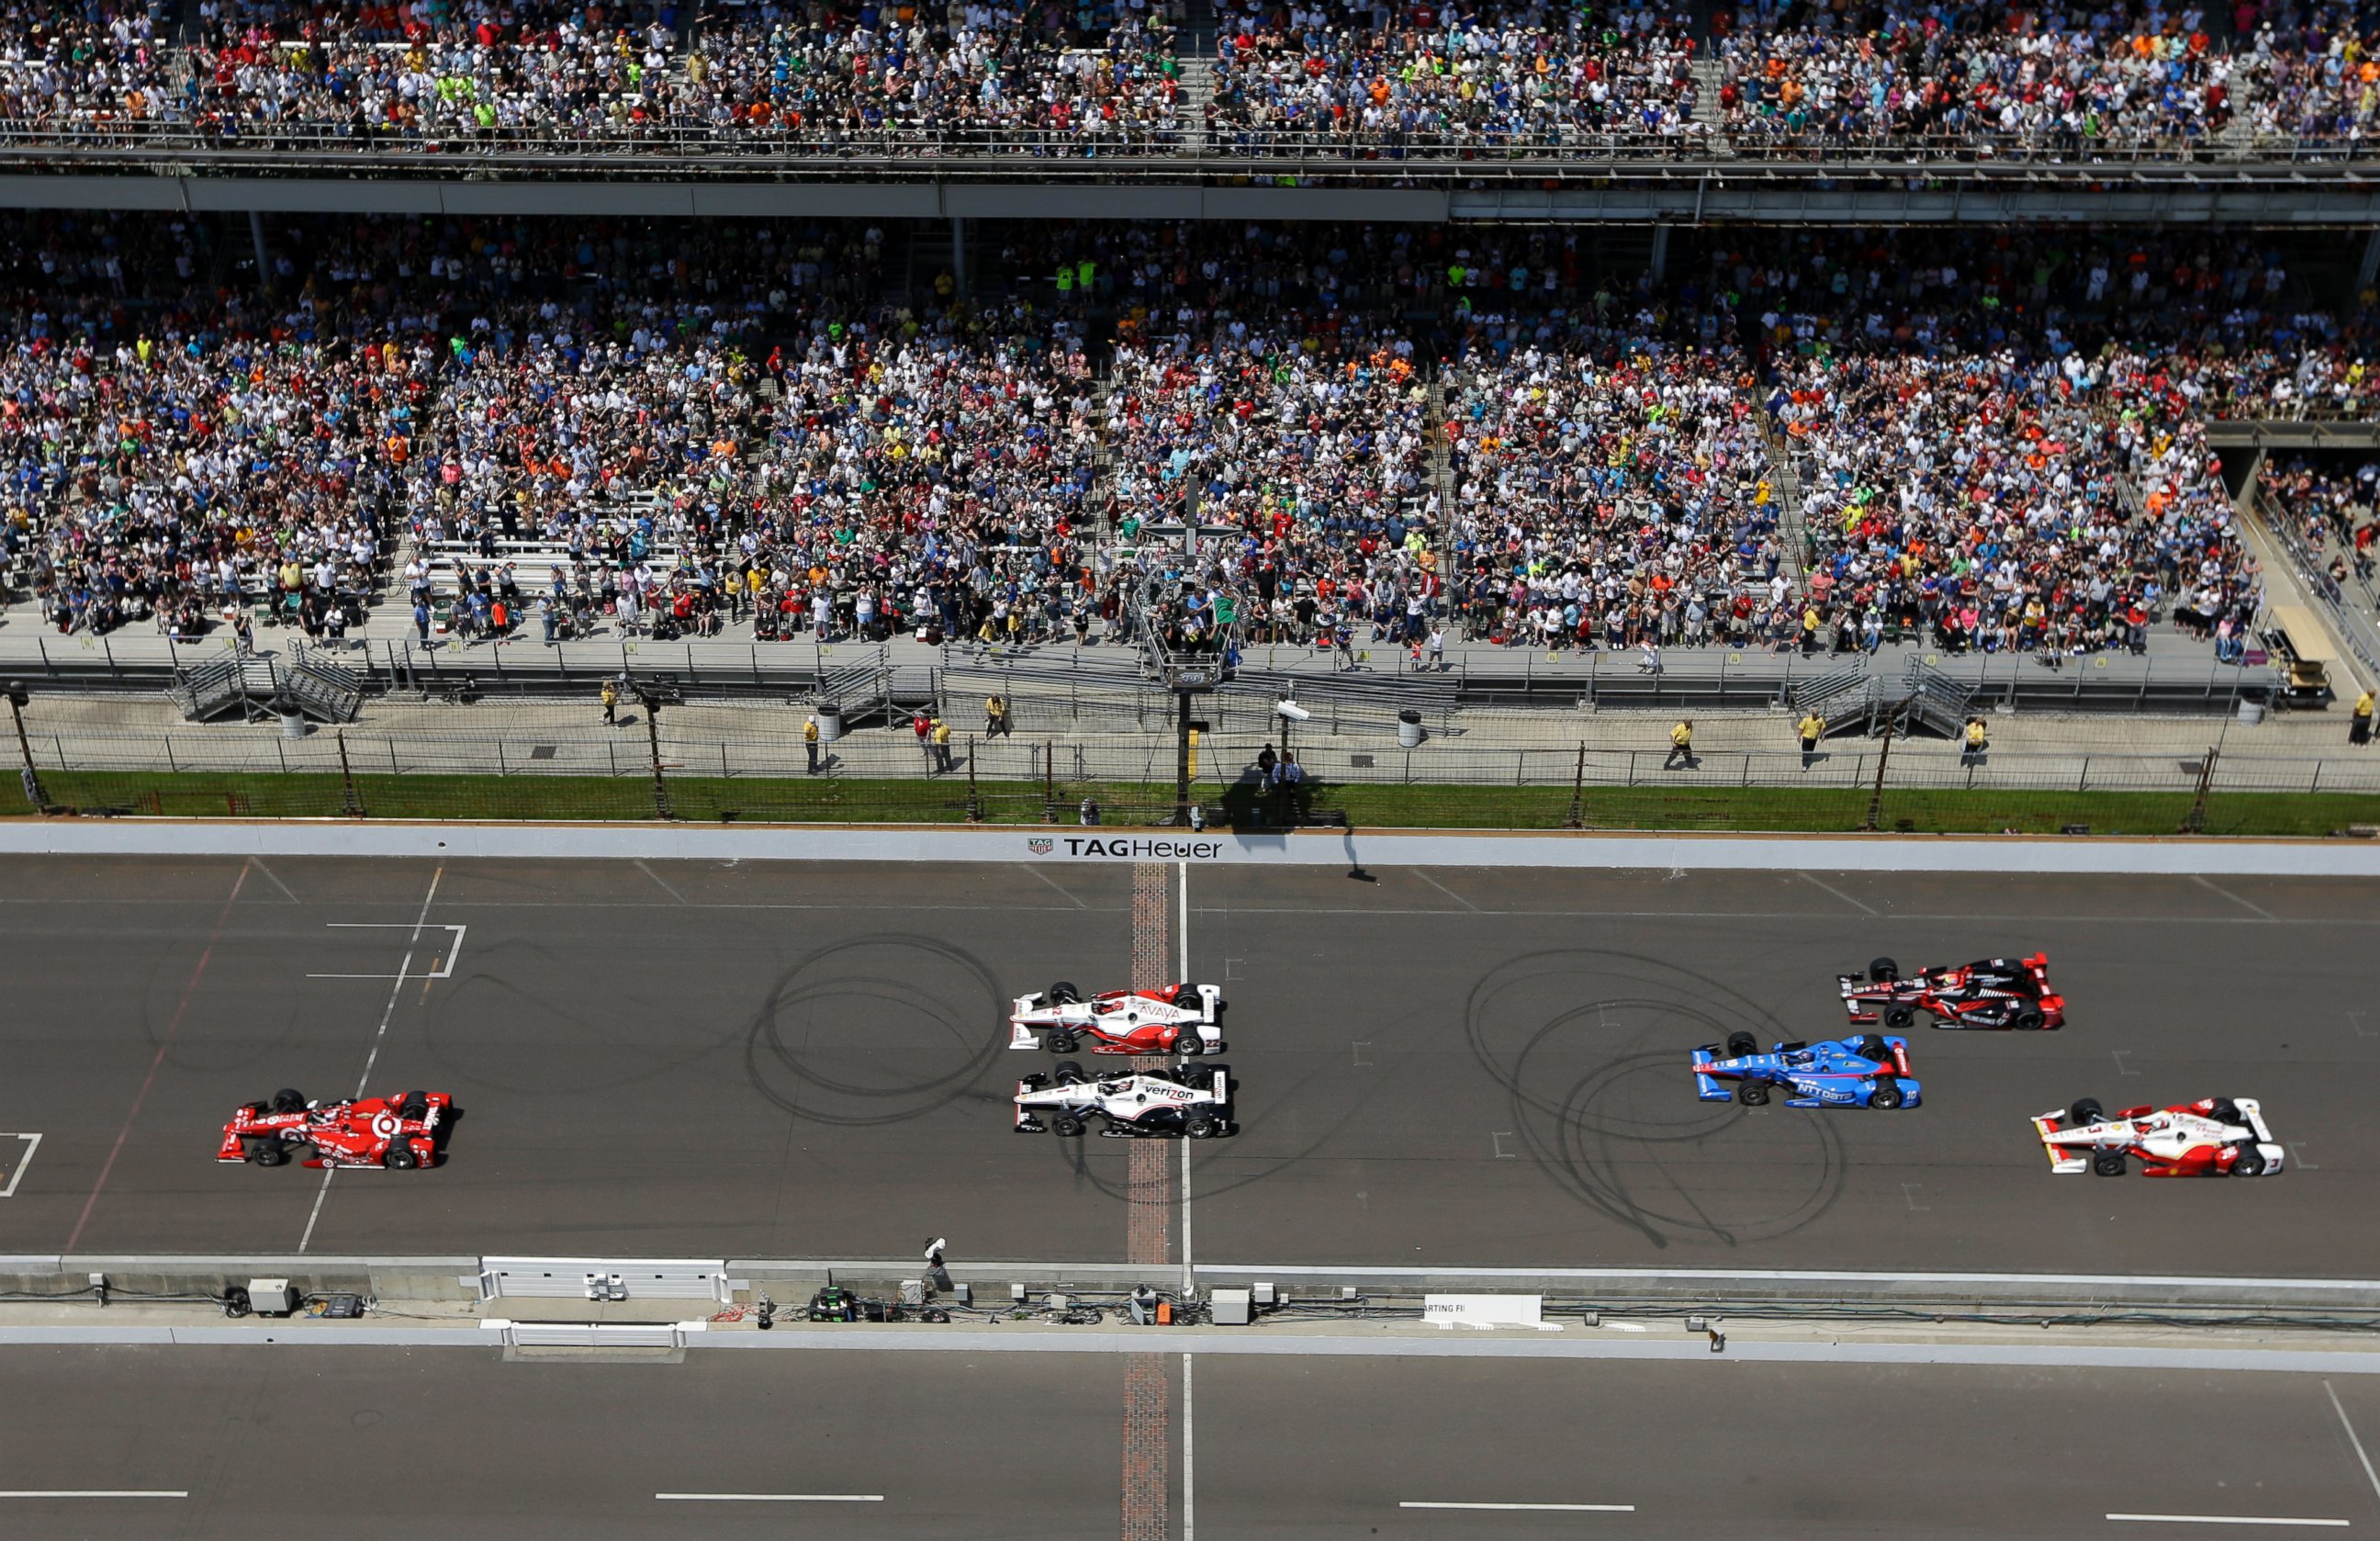 PHOTO: Scott Dixon, of New Zealand, leads the field to start the 99th running of the Indianapolis 500 auto race at Indianapolis Motor Speedway in Indianapolis, Sunday, May 24, 2015. 